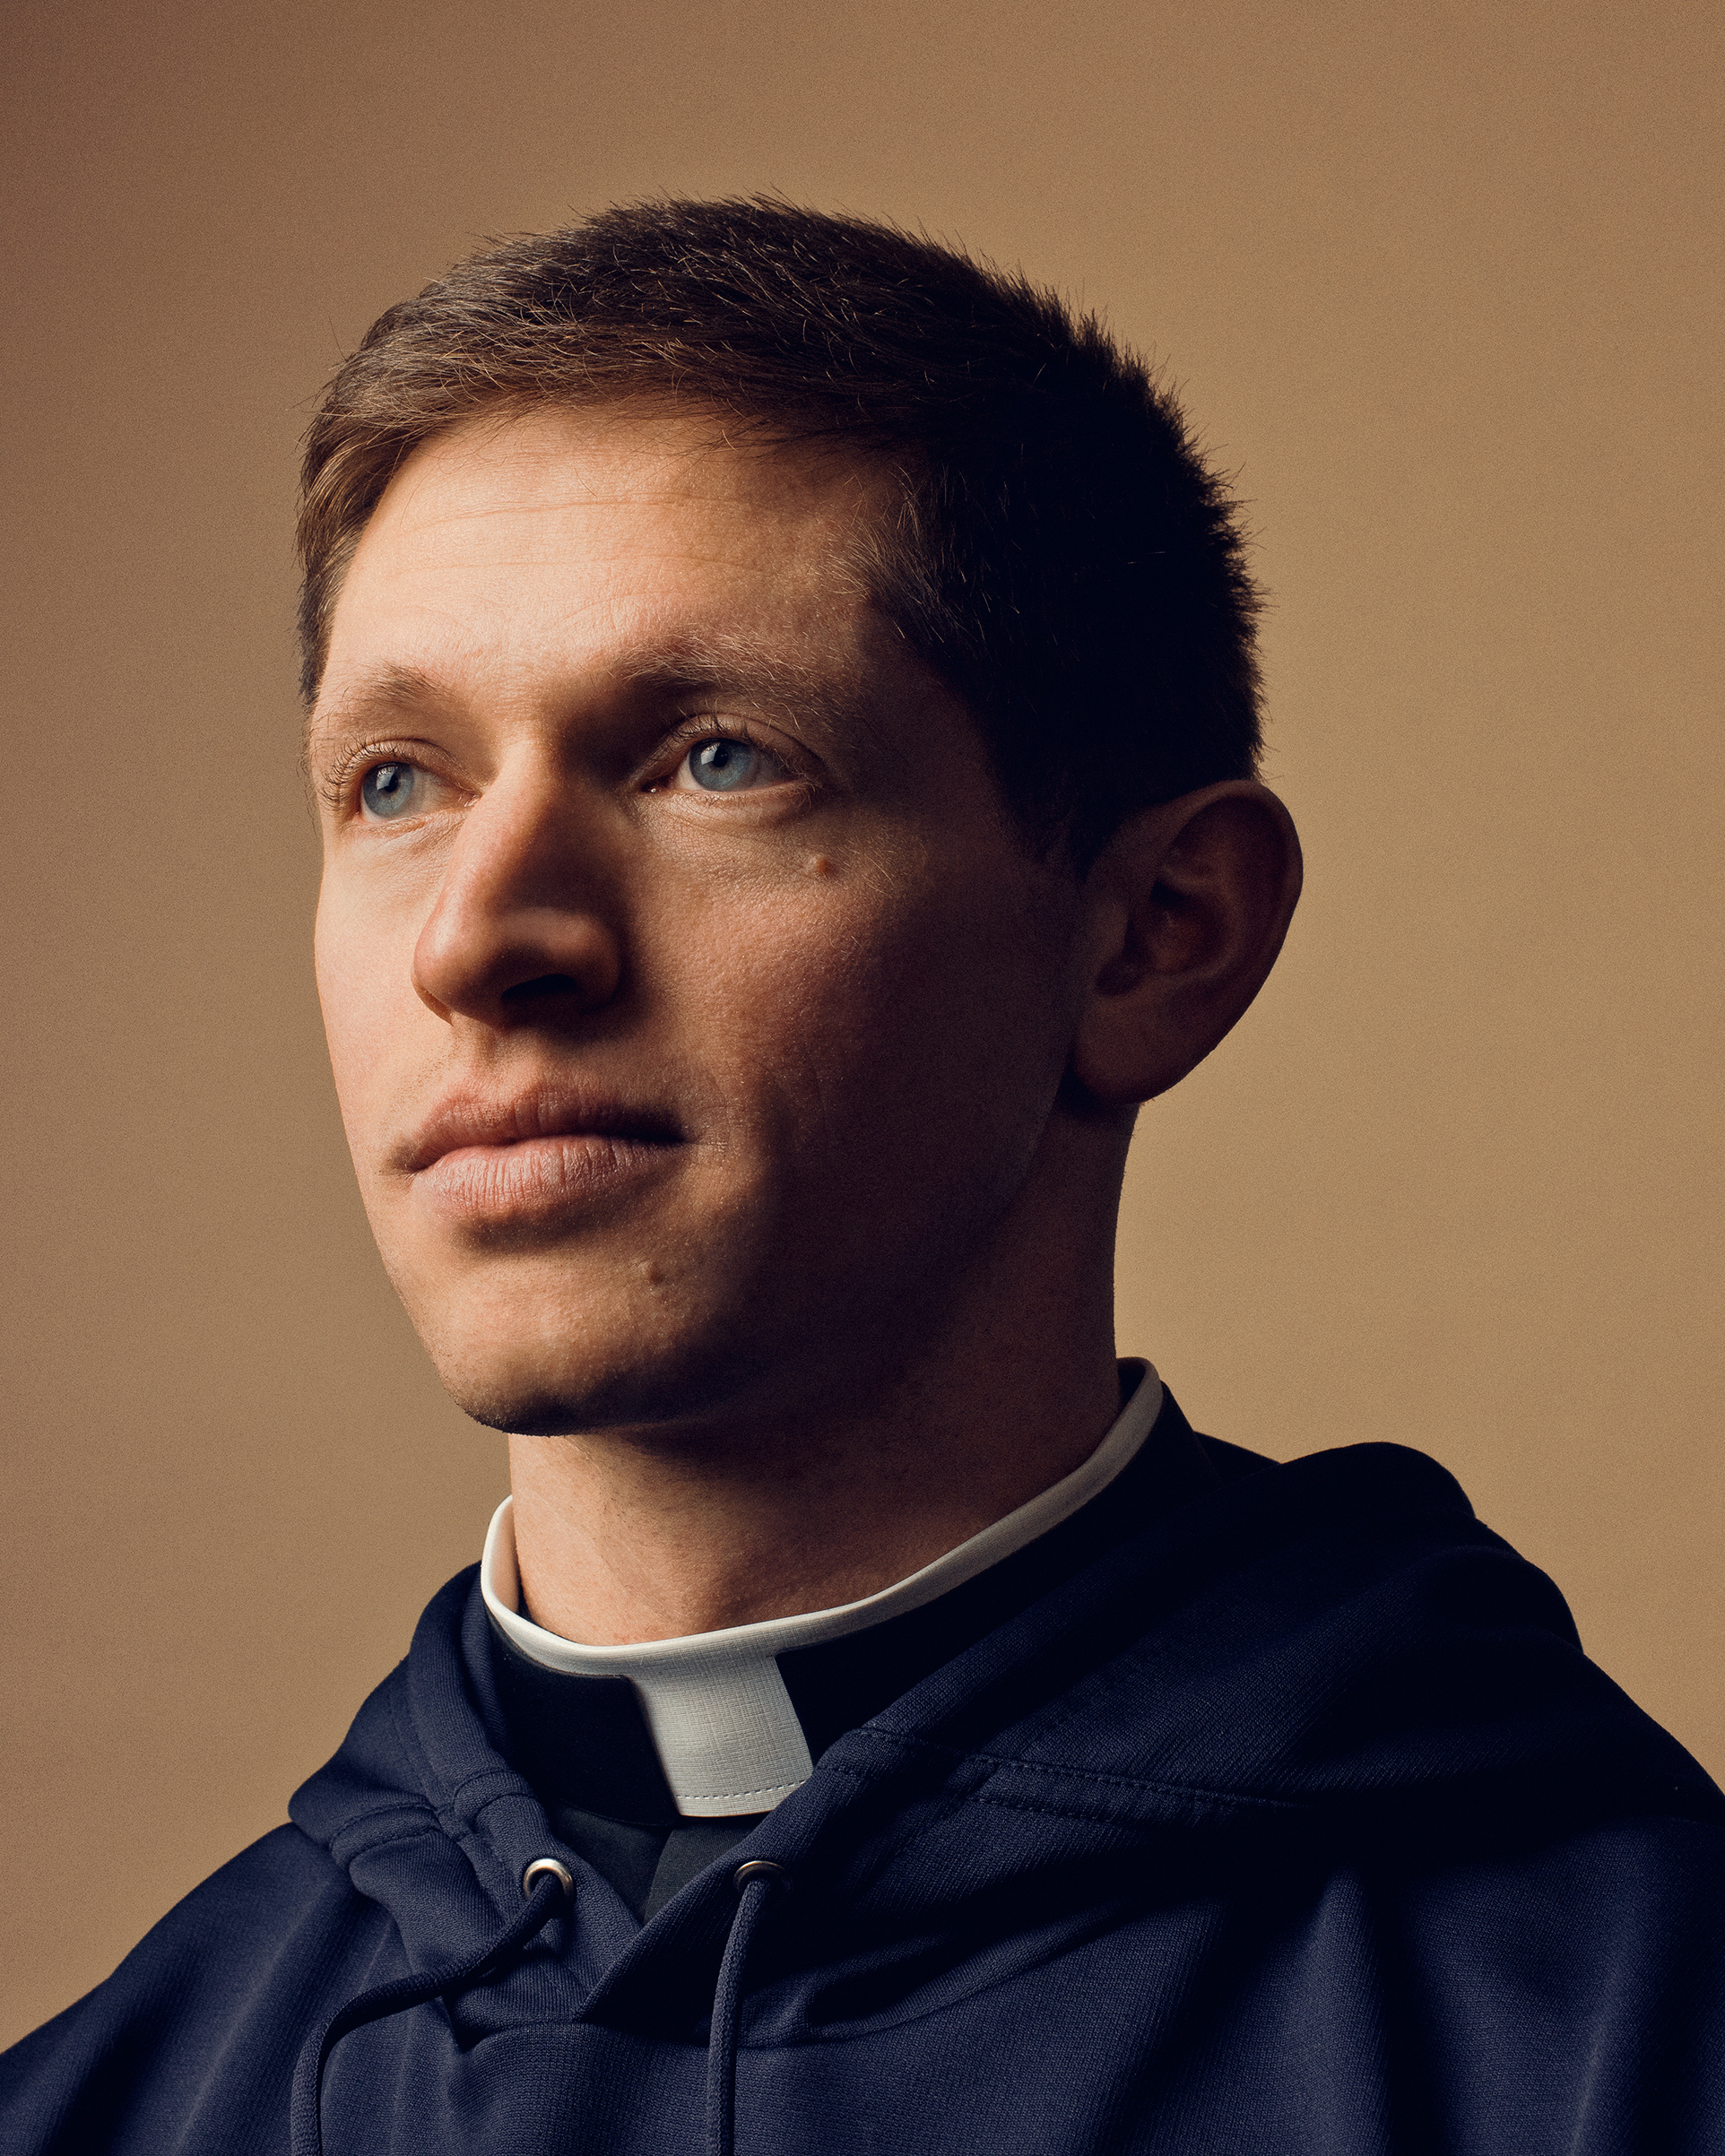 Parochial vicar of Our Lady of Mercy Church in Potomac, Md., Father Chris Seith, 28, admires the simple life that Pope Francis praises (Ryan Pfluger for TIME)